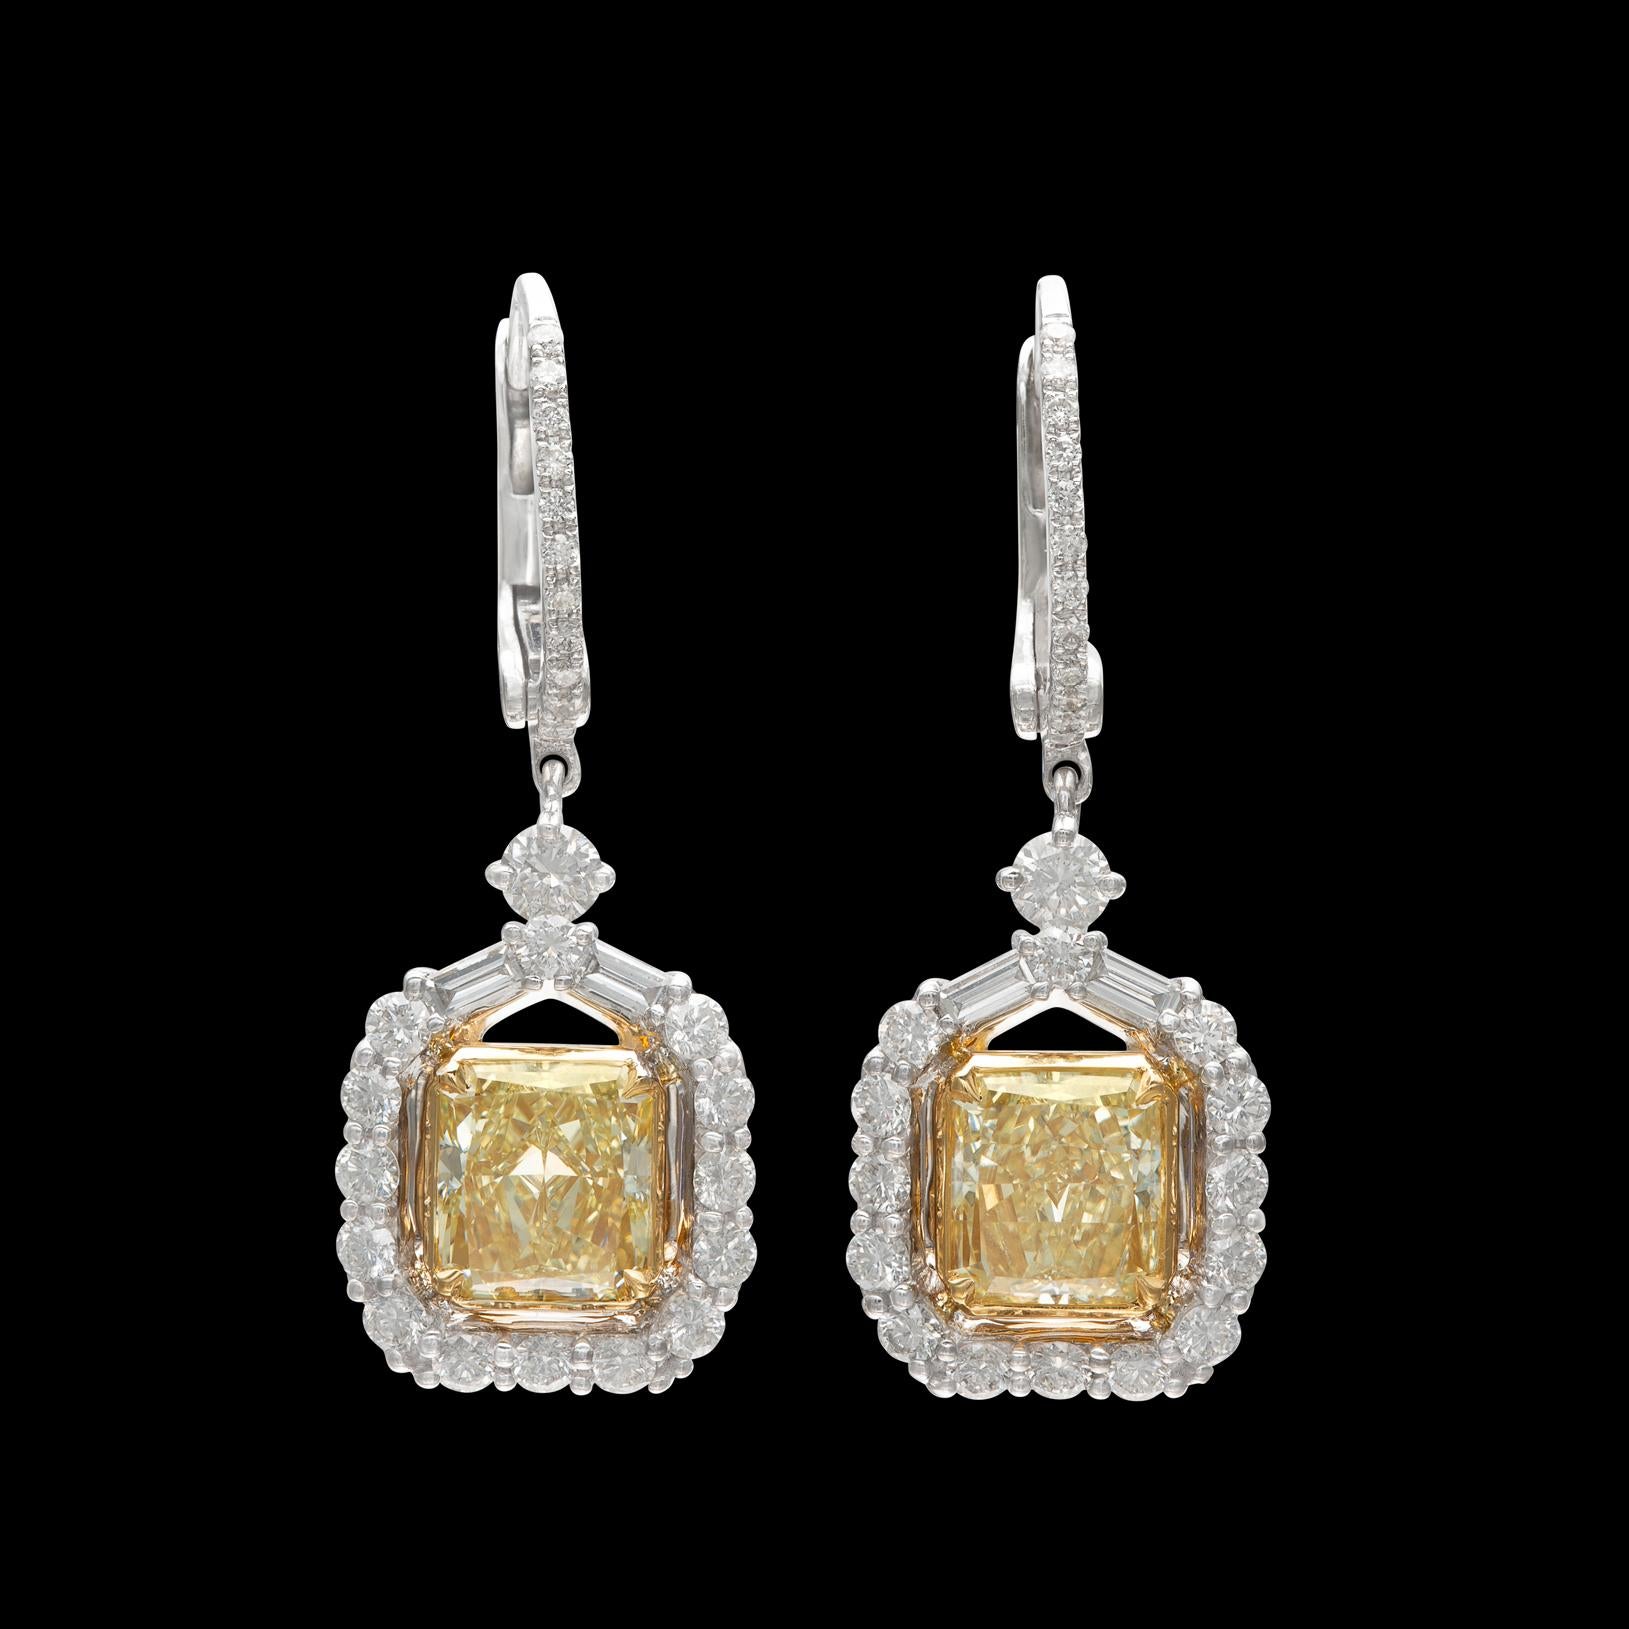 Exceptional Natural Yellow Diamond Drop Italian Earrings For Sale at ...